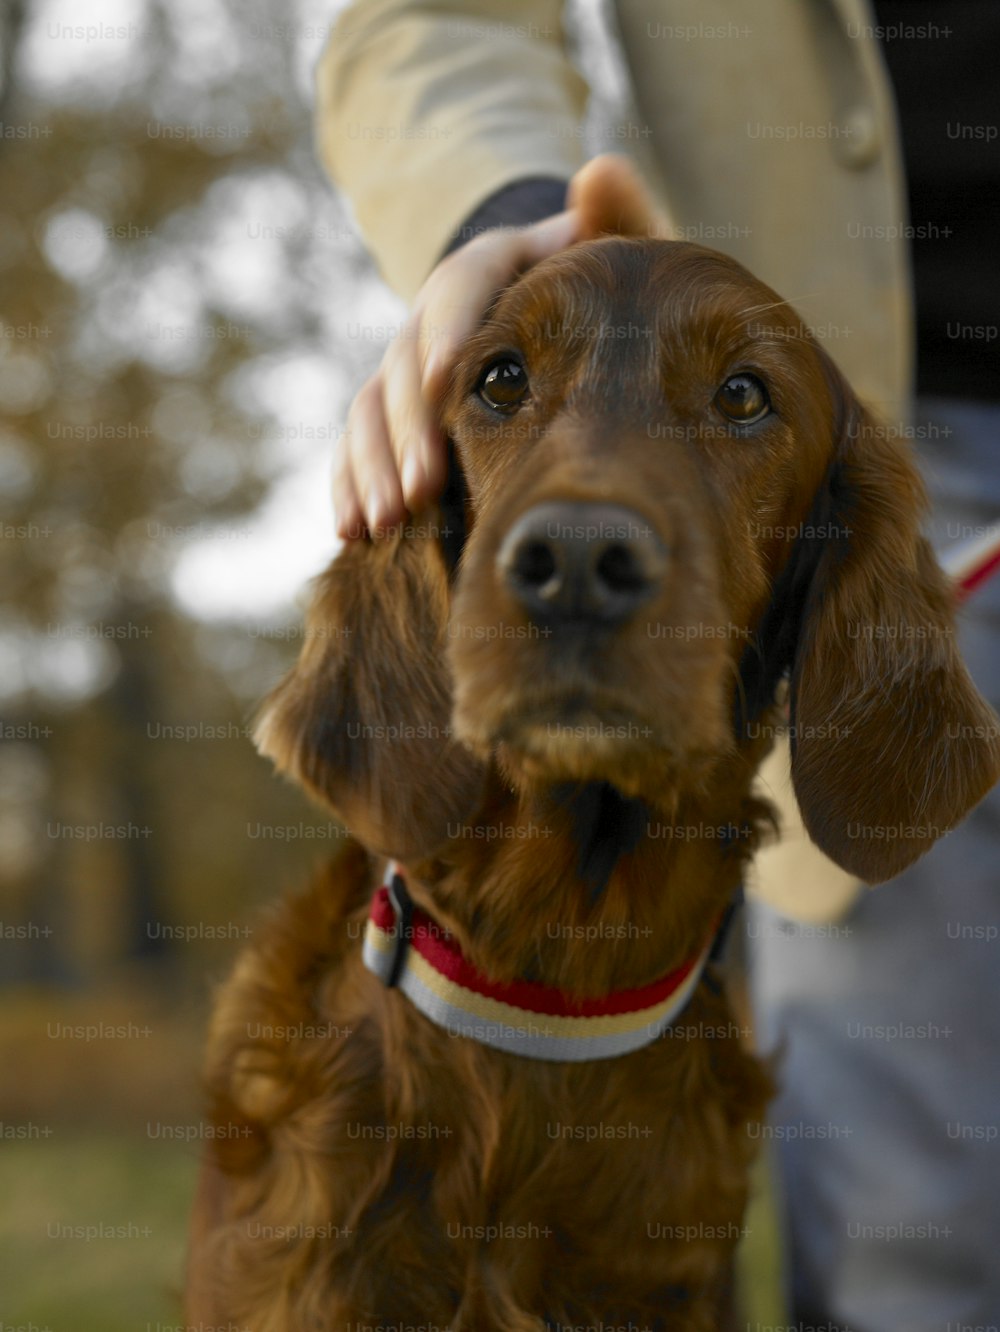 a brown dog with a red collar standing next to a person